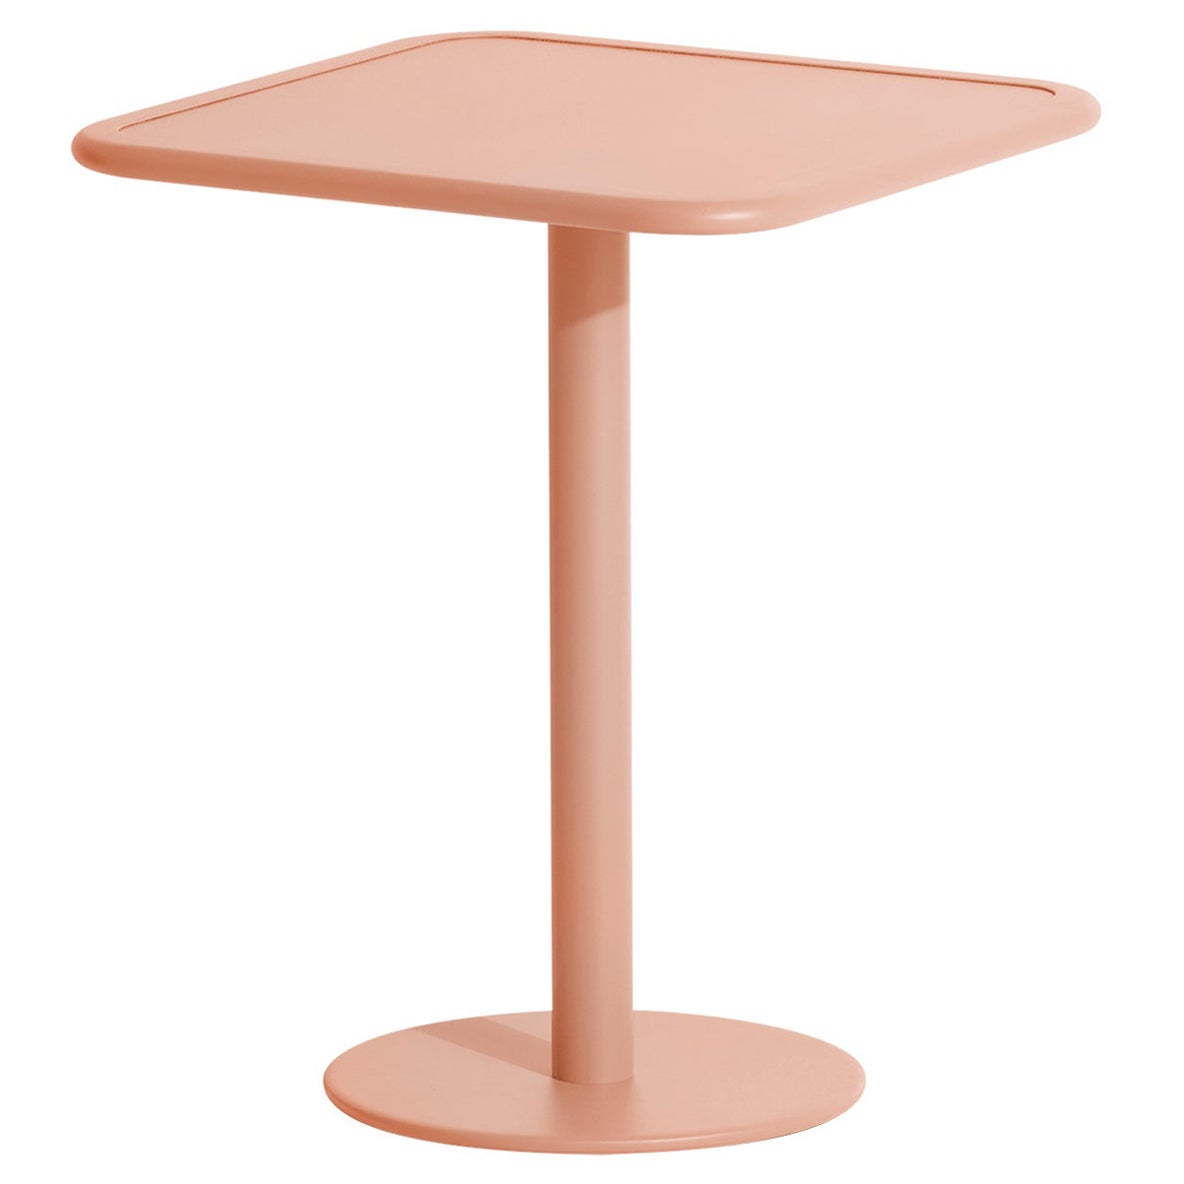 Petite Friture Week-End Bistro Square Dining Table in Blush Aluminium, 2017 For Sale